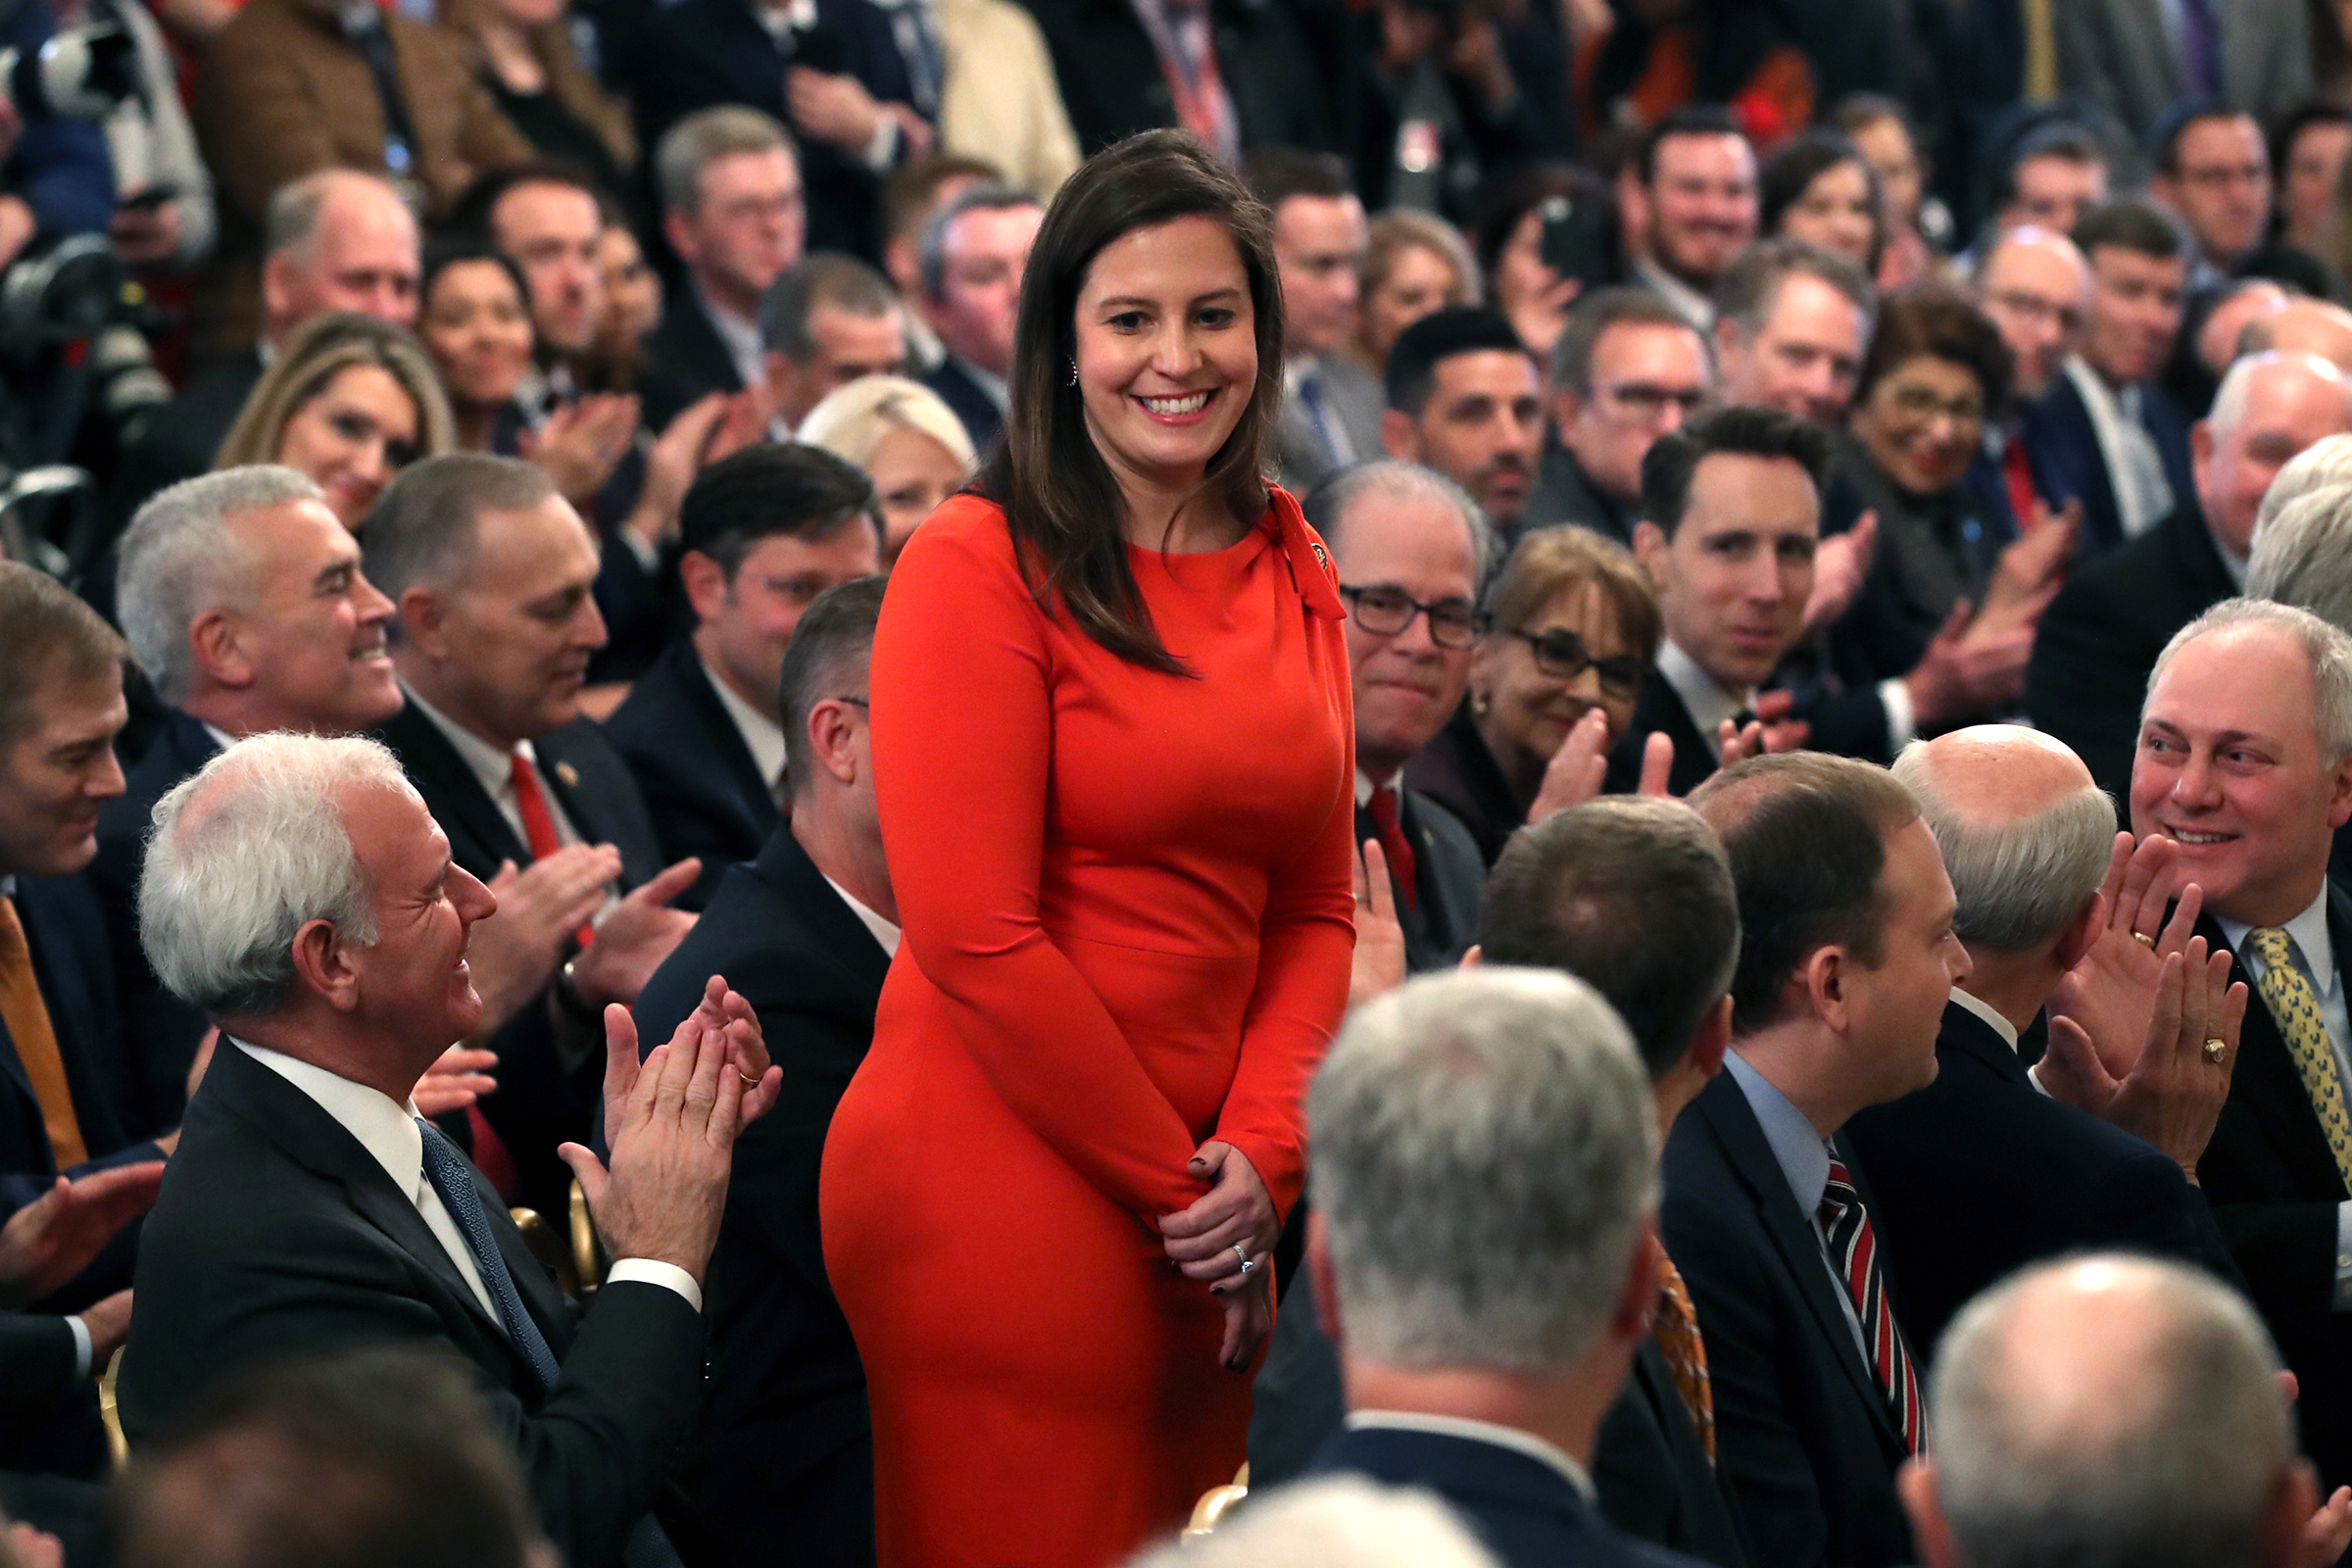 Republican Rep. Elise Stefanik stands as she's acknowledged by U.S. President Donald Trump as he speaks one day after the U.S. Senate acquitted on two articles of impeachment, in the East Room of the White House February 6, 2020 in Washington, DC.